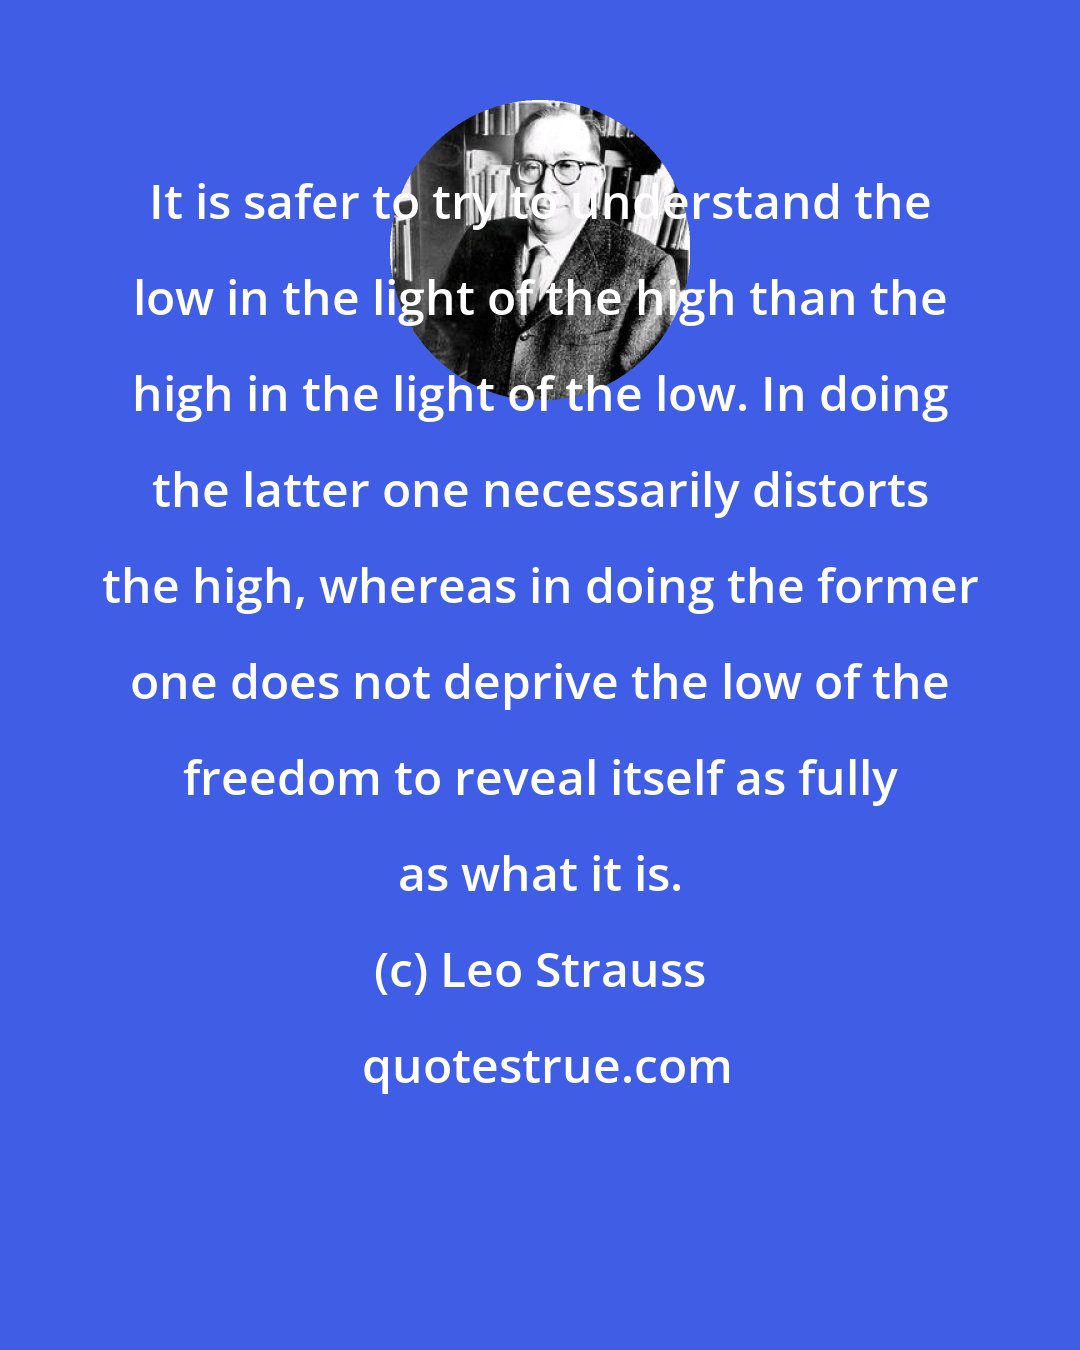 Leo Strauss: It is safer to try to understand the low in the light of the high than the high in the light of the low. In doing the latter one necessarily distorts the high, whereas in doing the former one does not deprive the low of the freedom to reveal itself as fully as what it is.